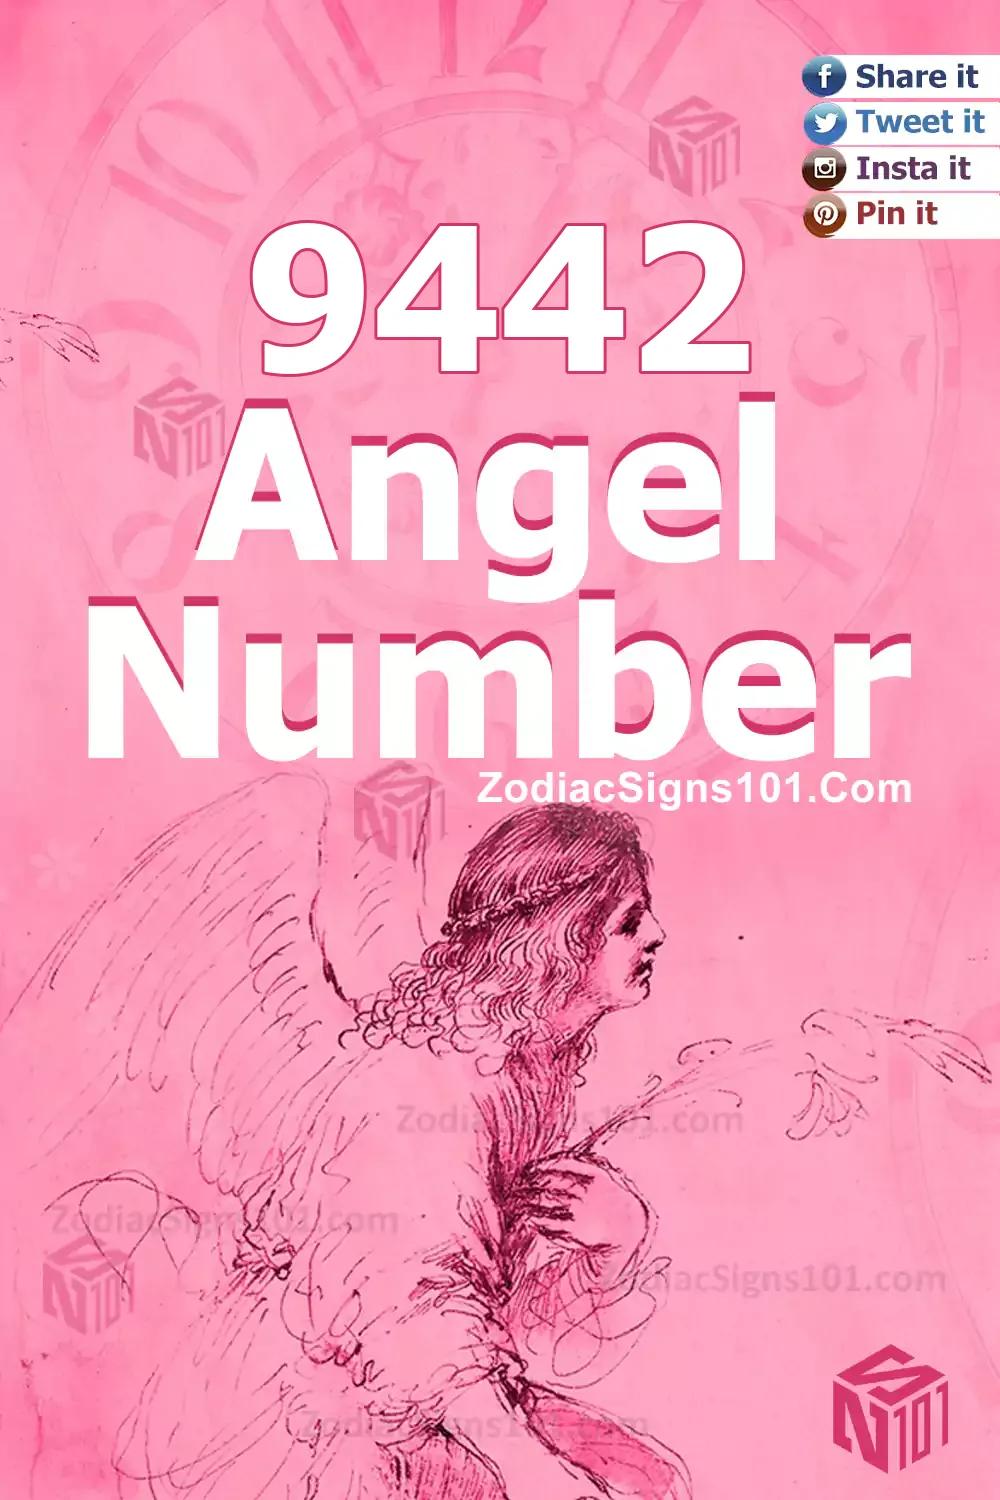 9442 Angel Number Meaning